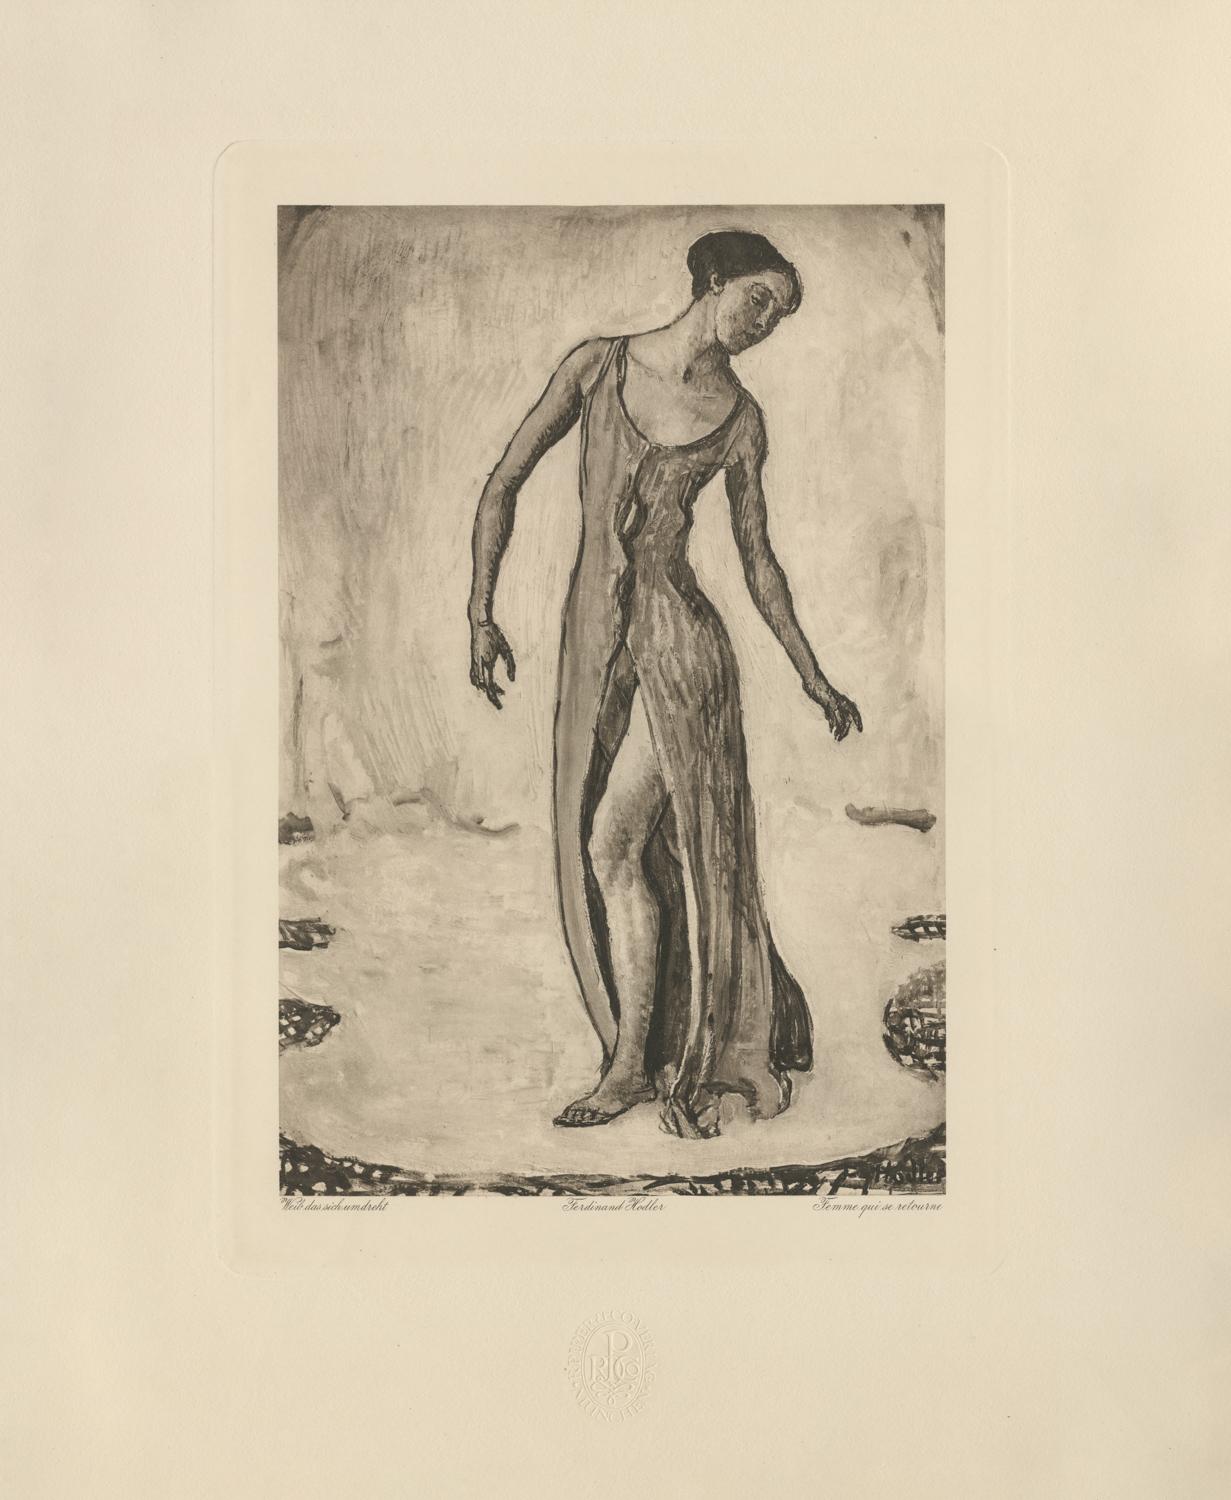 Ferdinand Hodler & R. Piper & Co. Figurative Print - "Woman Turning Around" Copper Plate Heliogravure